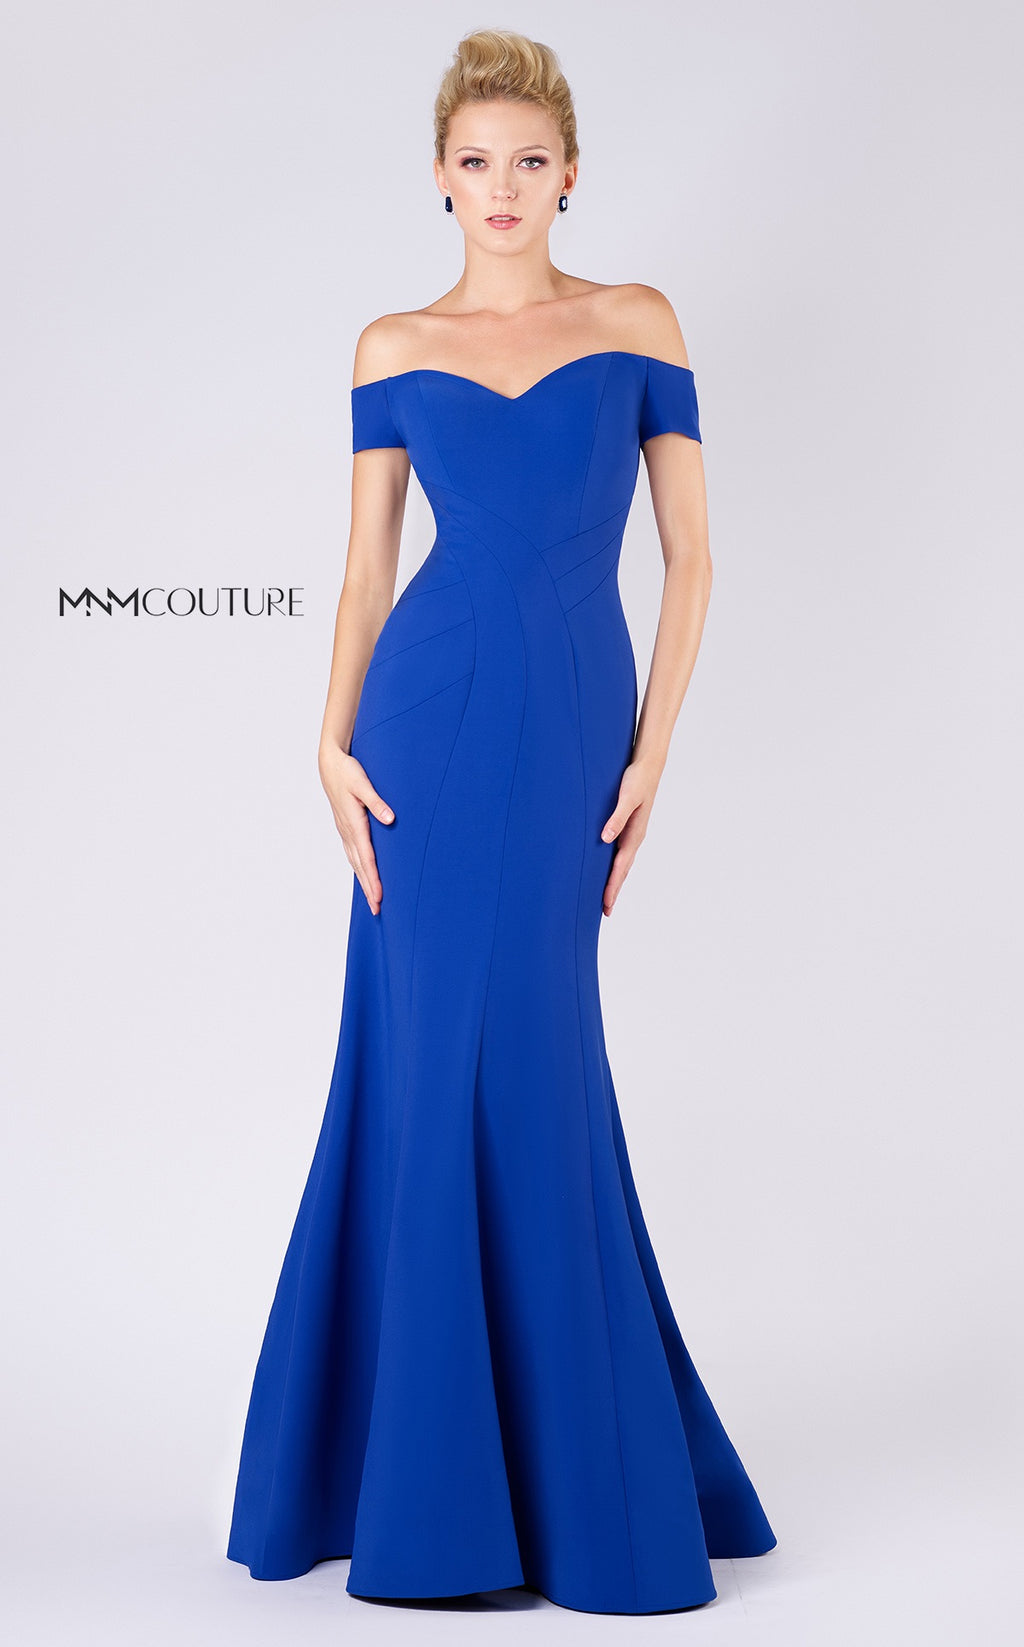 MNM Couture M0005 Crepe Mermaid Gown - CYC Boutique